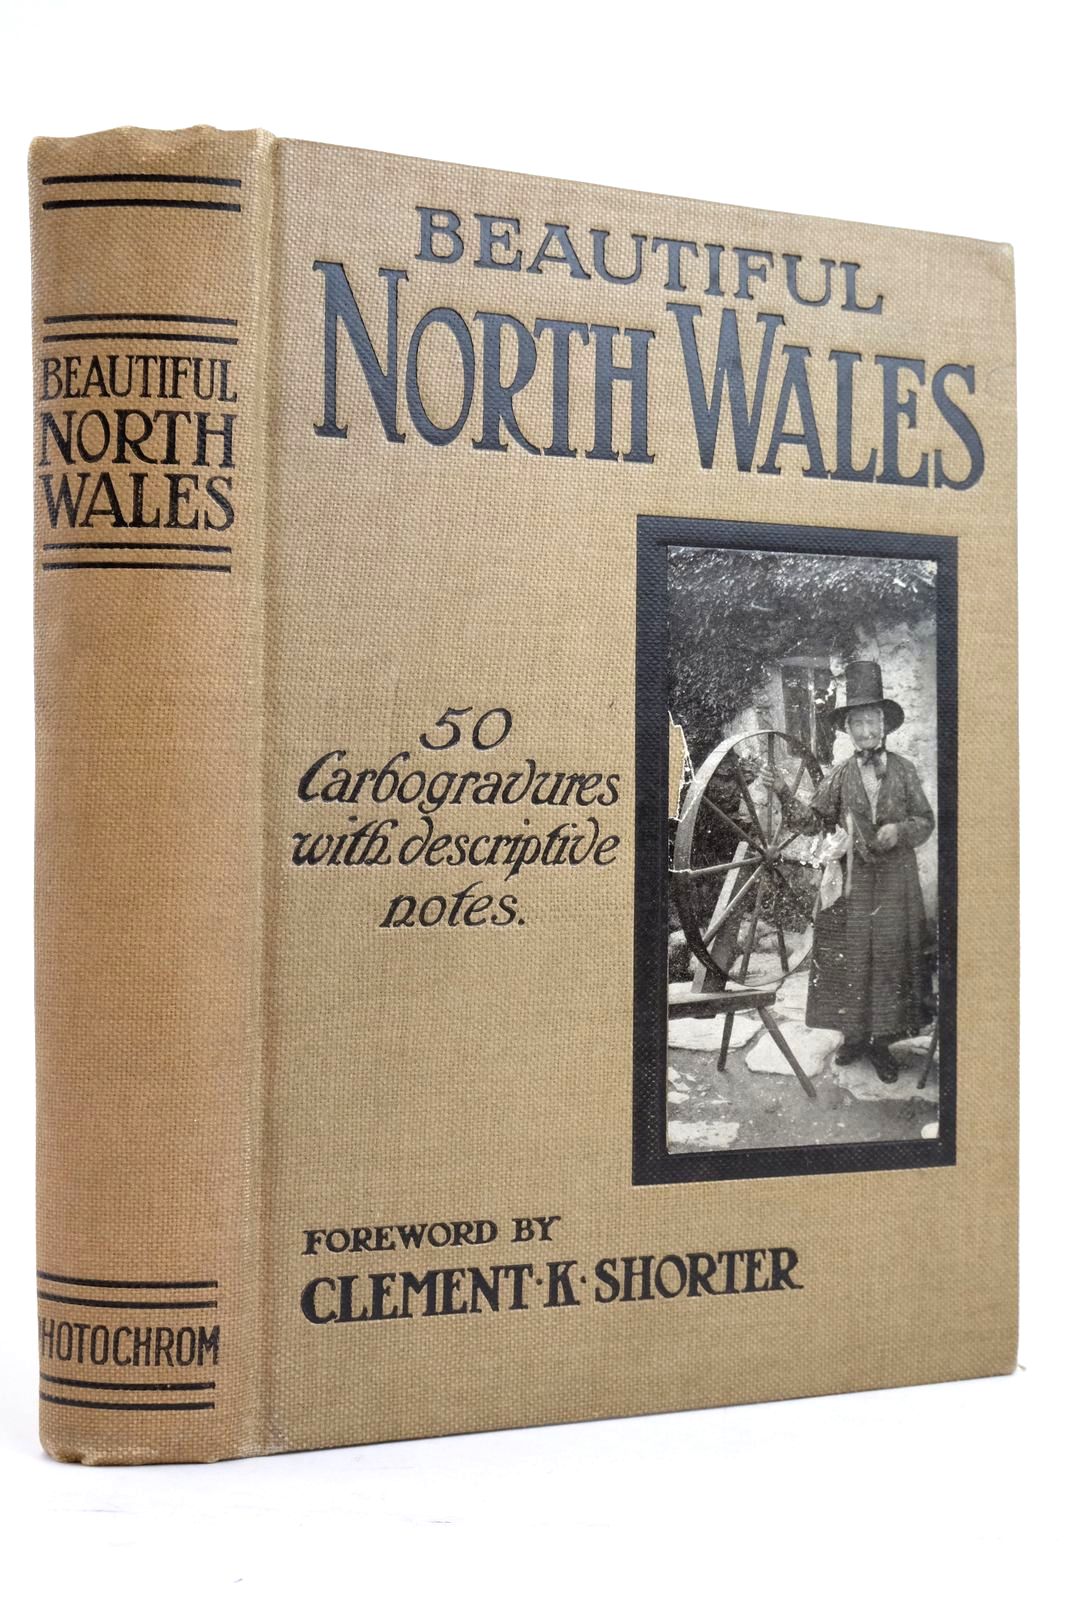 Photo of BEAUTIFUL NORTH WALES written by Shorter, Clement K. published by The Photochrom Co. Ltd. (STOCK CODE: 2135857)  for sale by Stella & Rose's Books